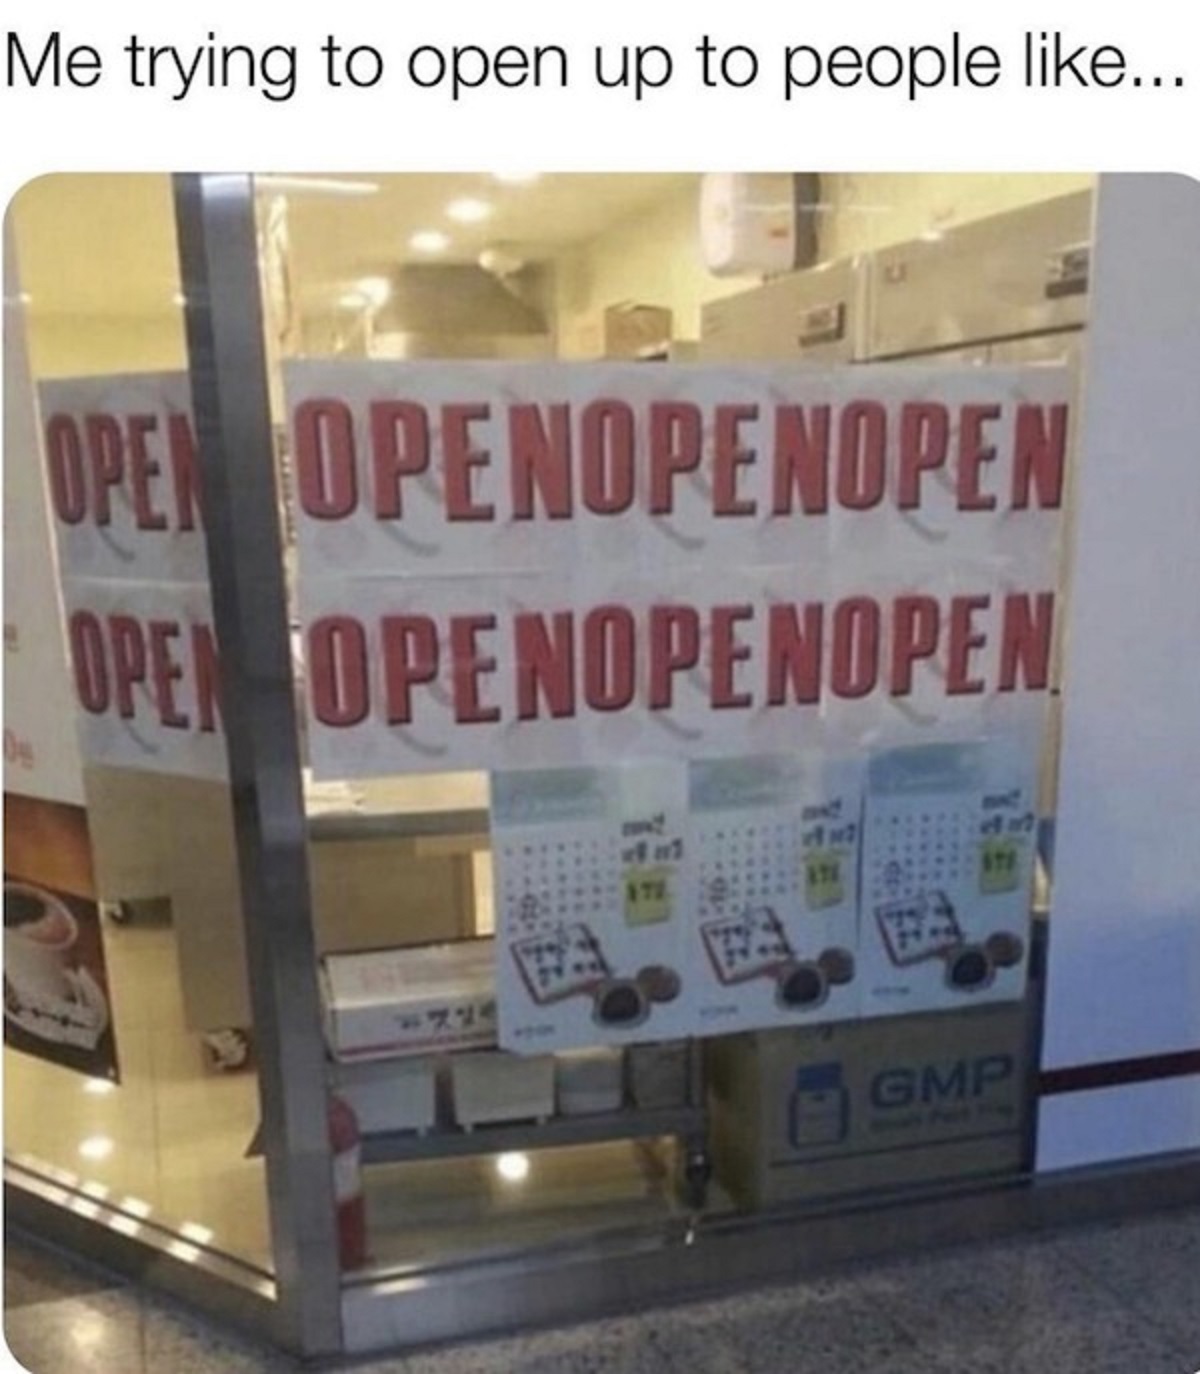 Me trying to open up to people ... Open Openopenopen Open Openopenopen 724 Gmp